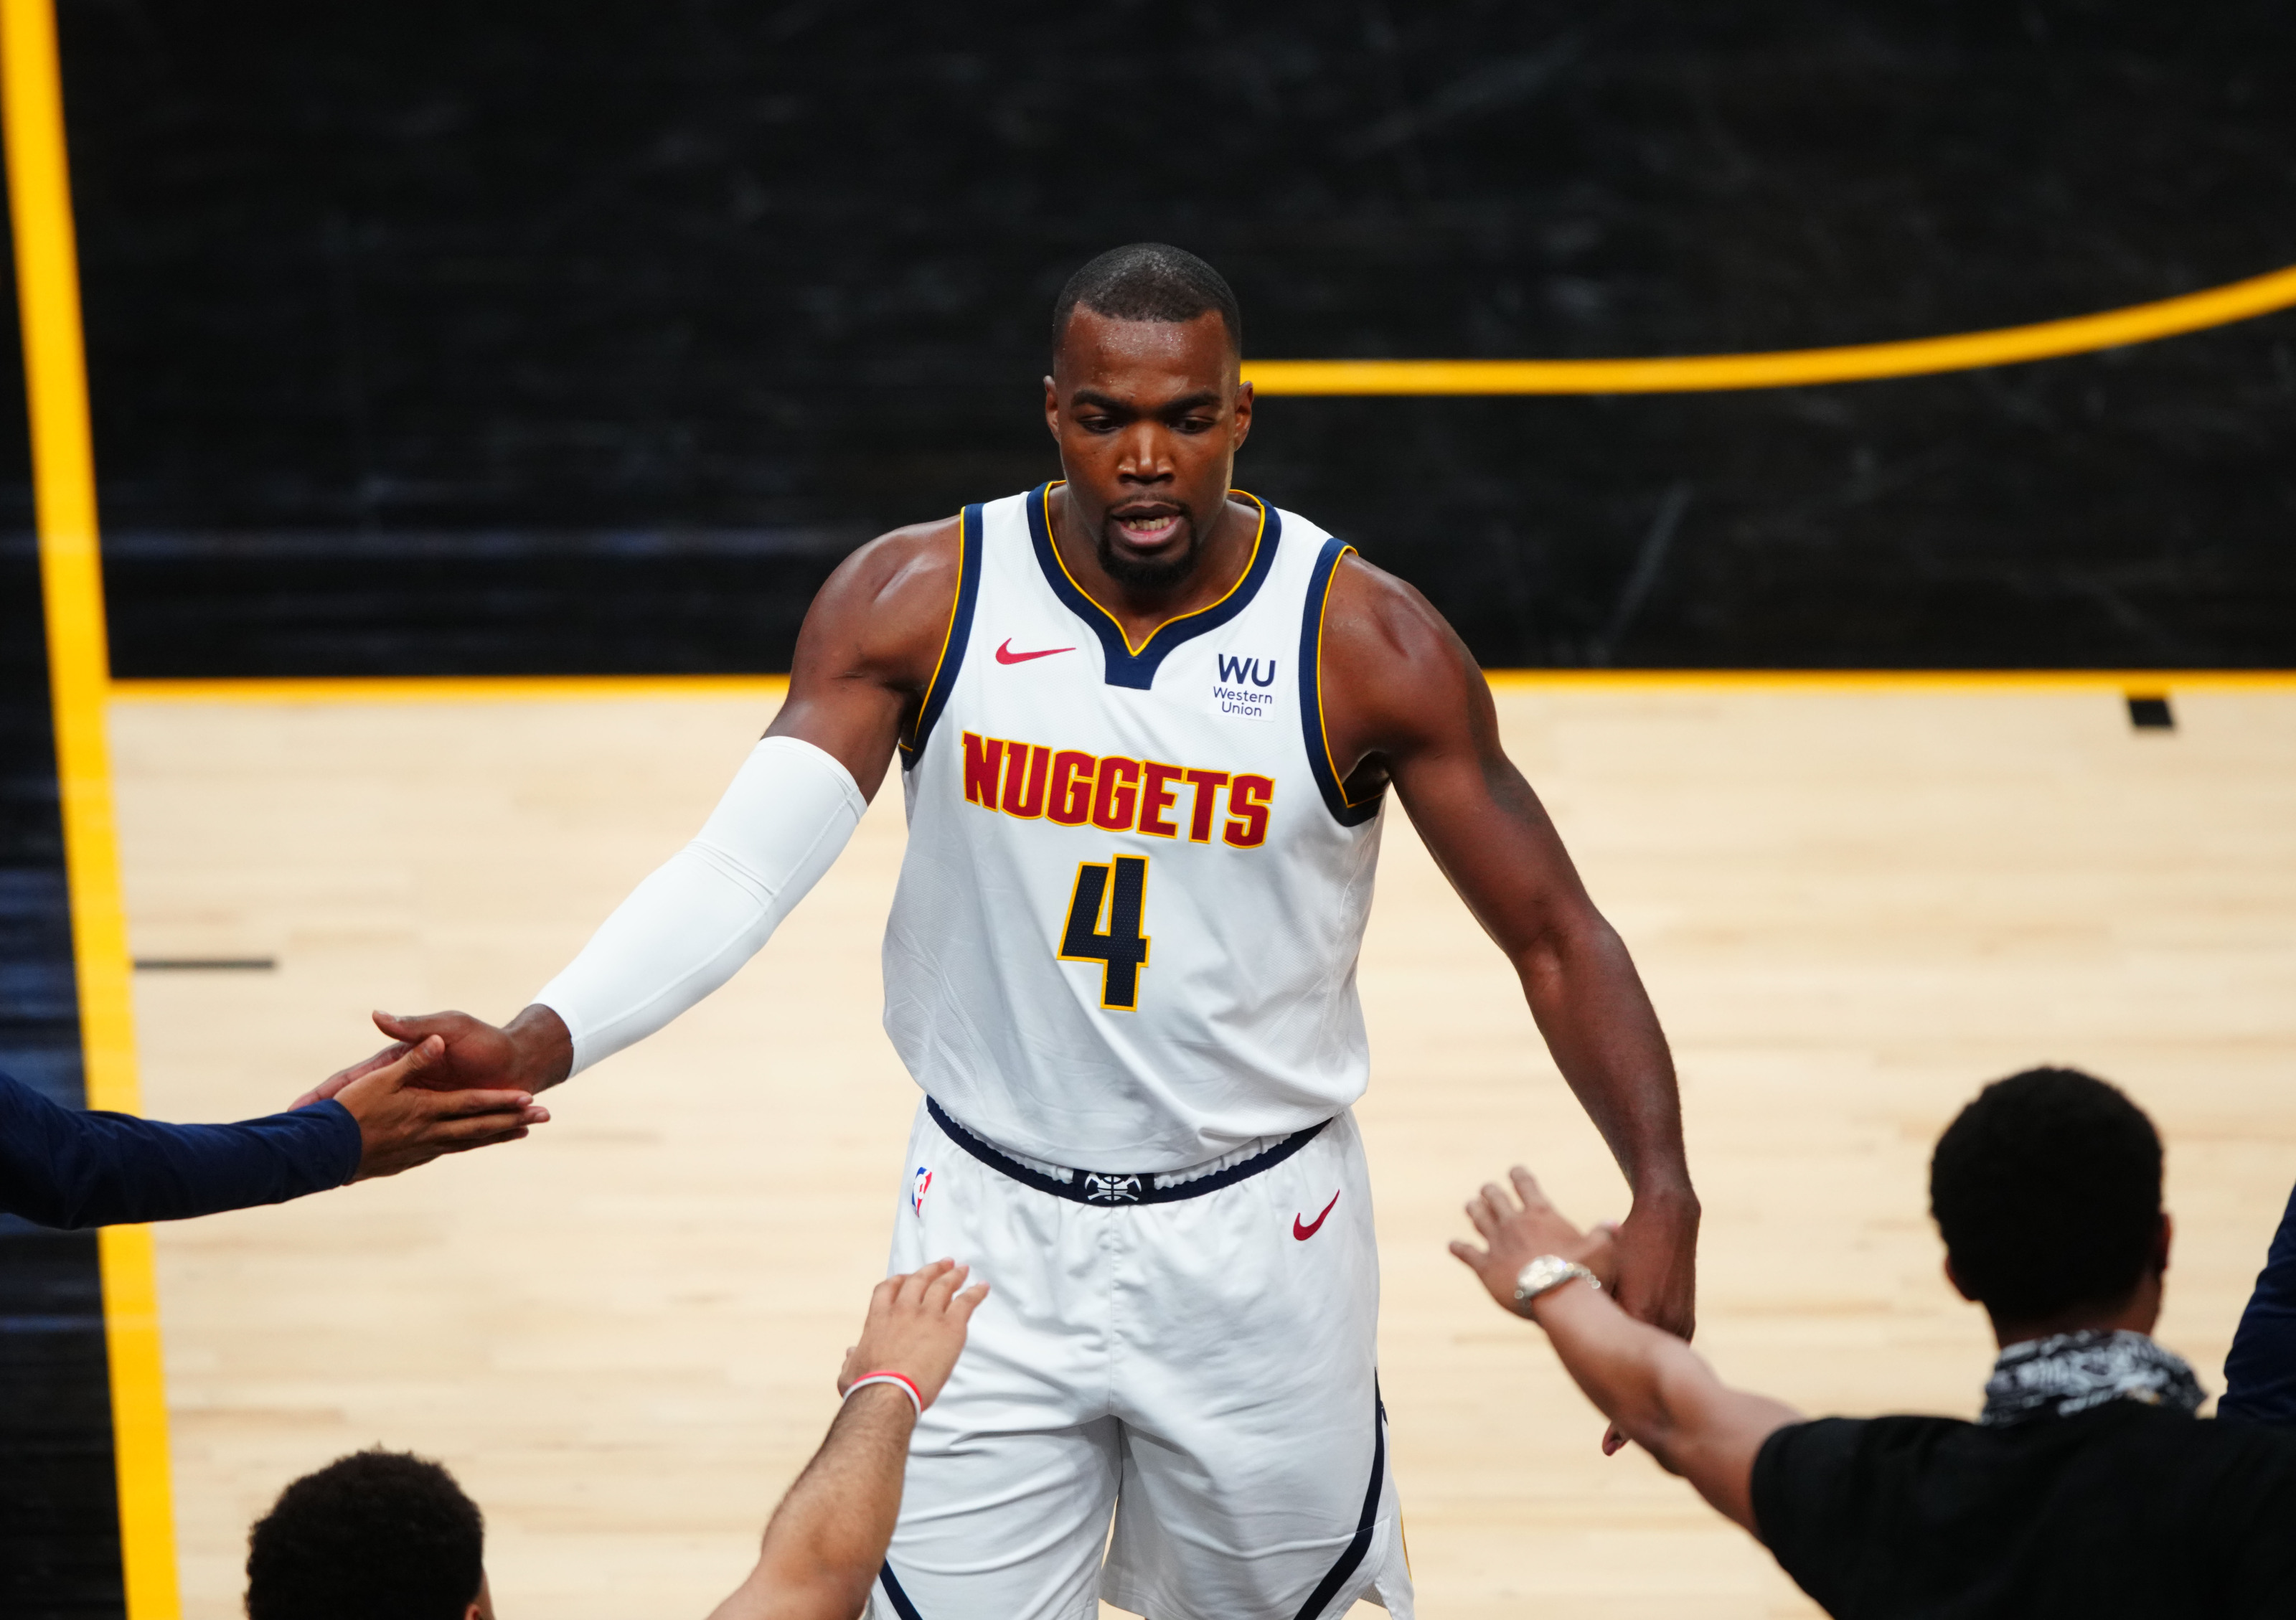 Nuggets want Paul Millsap, but veteran's free agent decision will